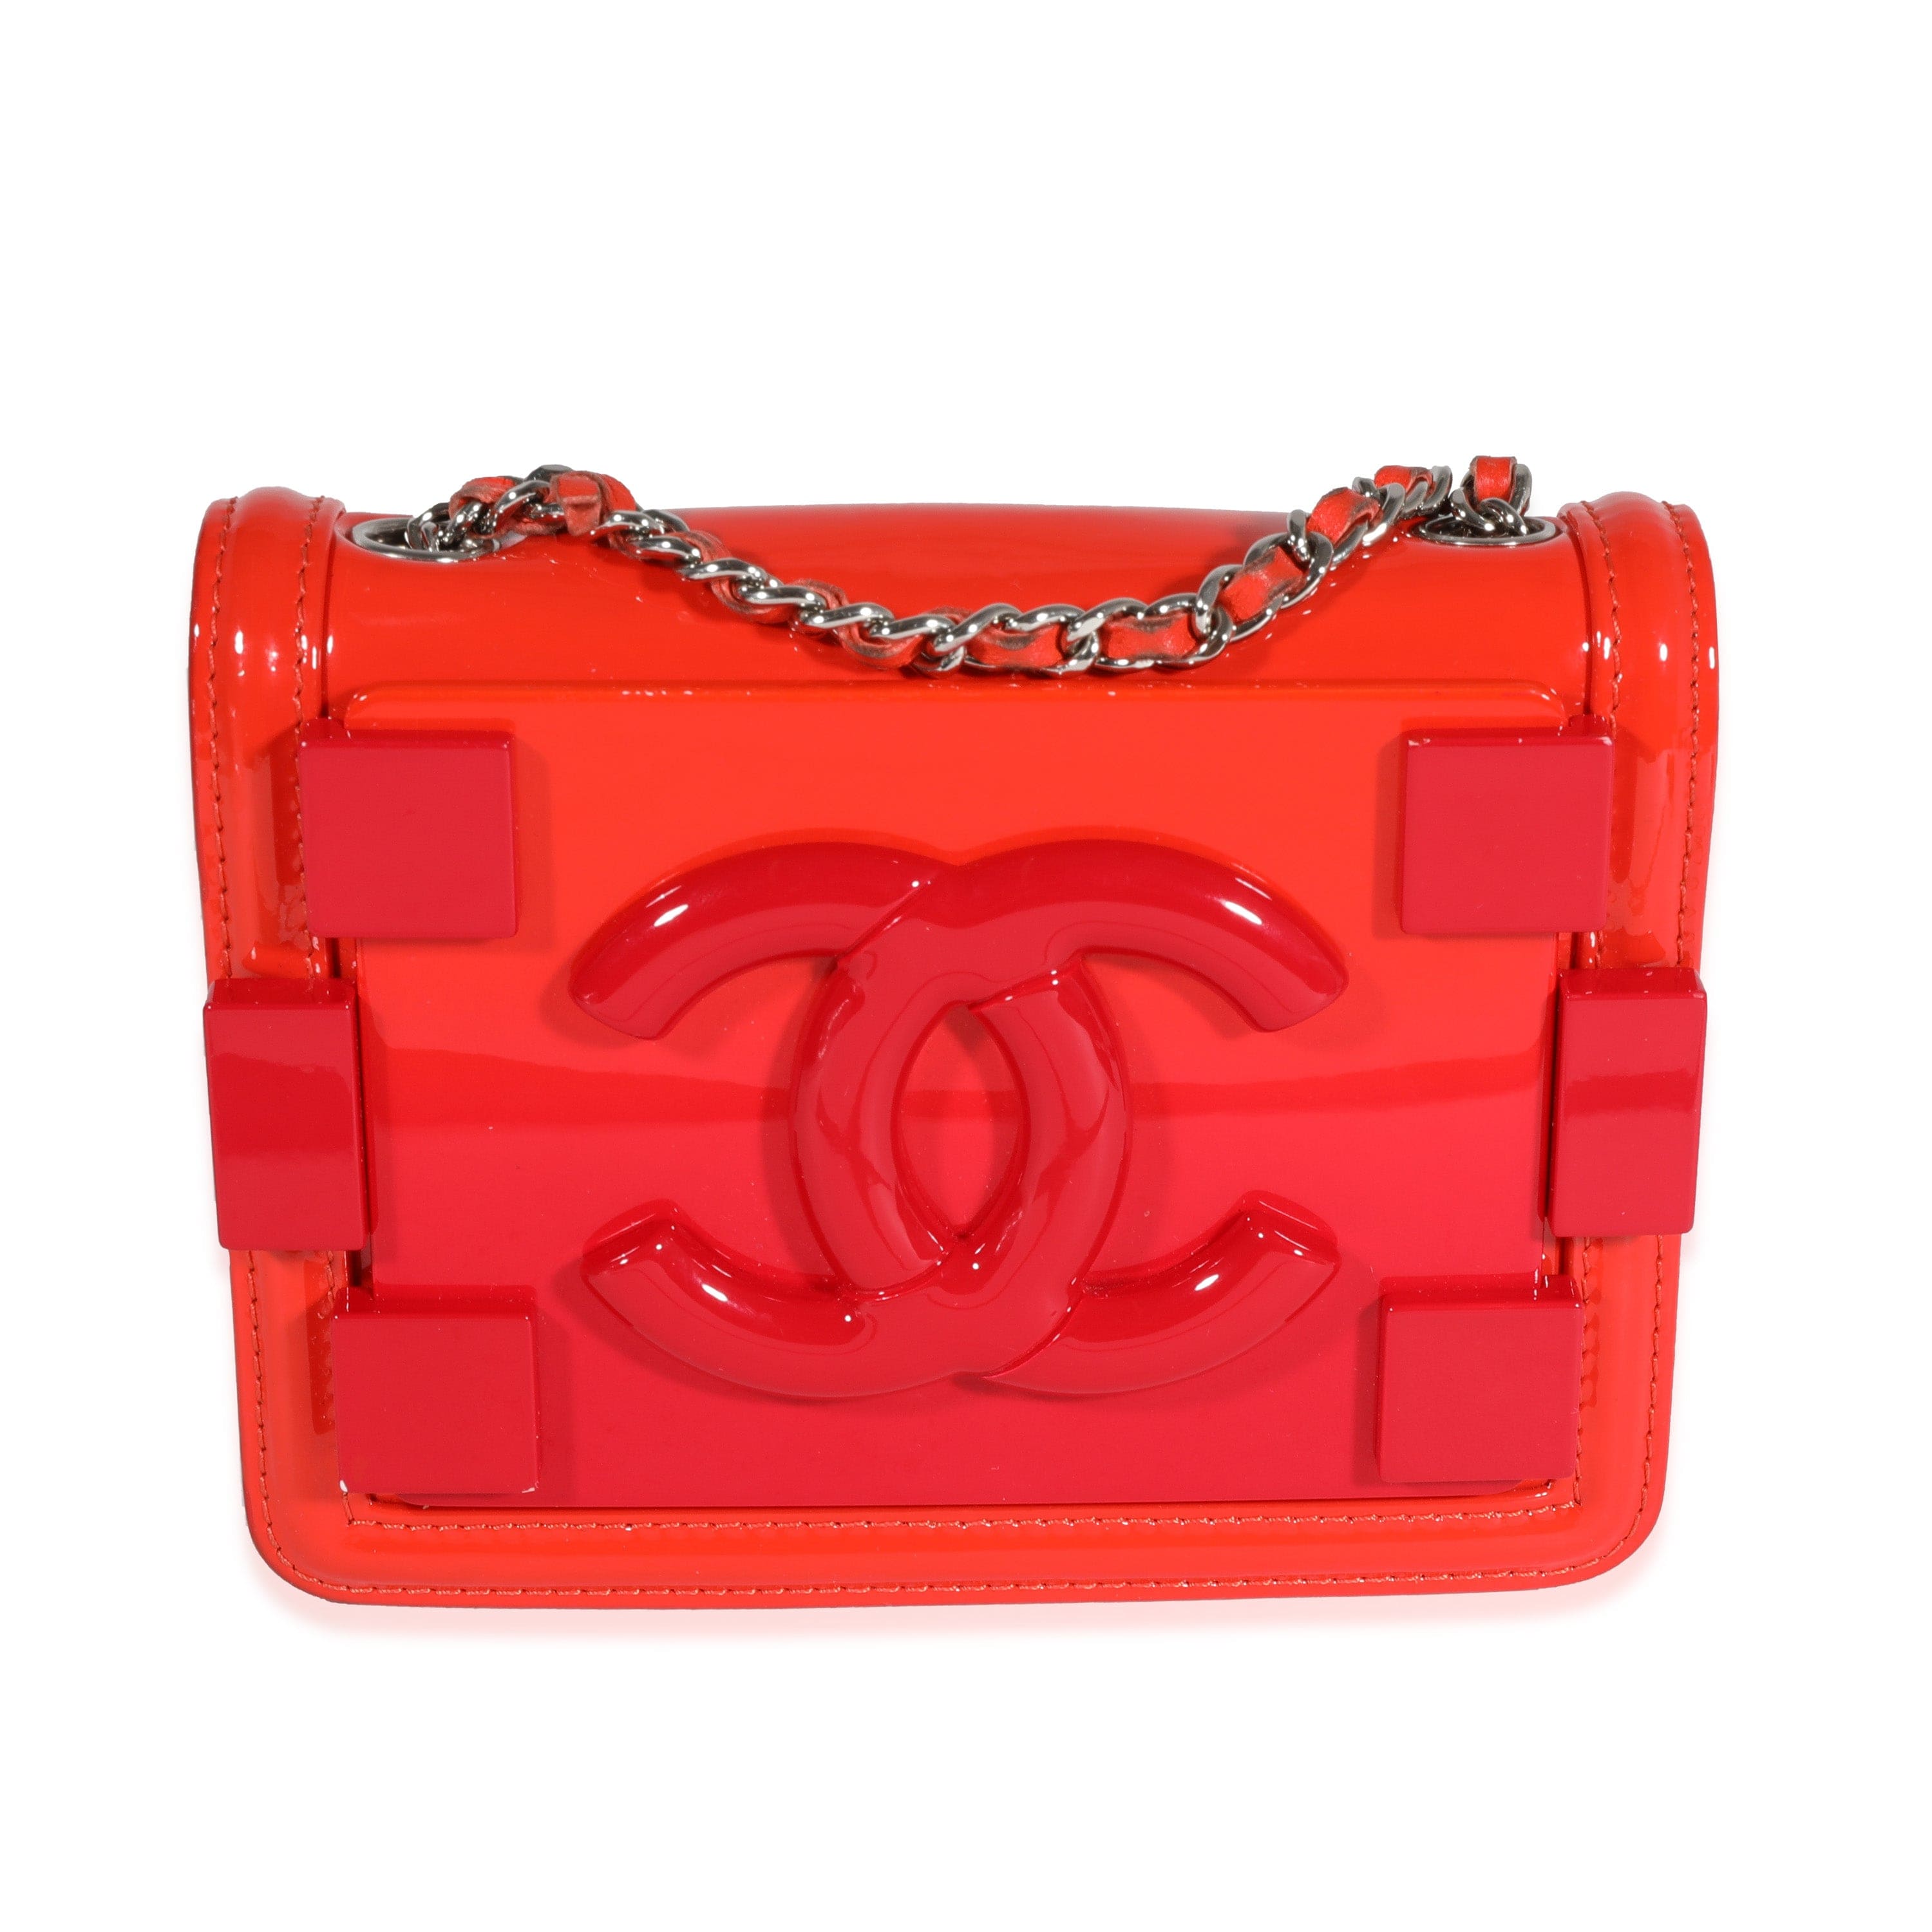 Chanel Chanel Red Quilted Patent Leather & Plexi Boy Brick Flap Bag